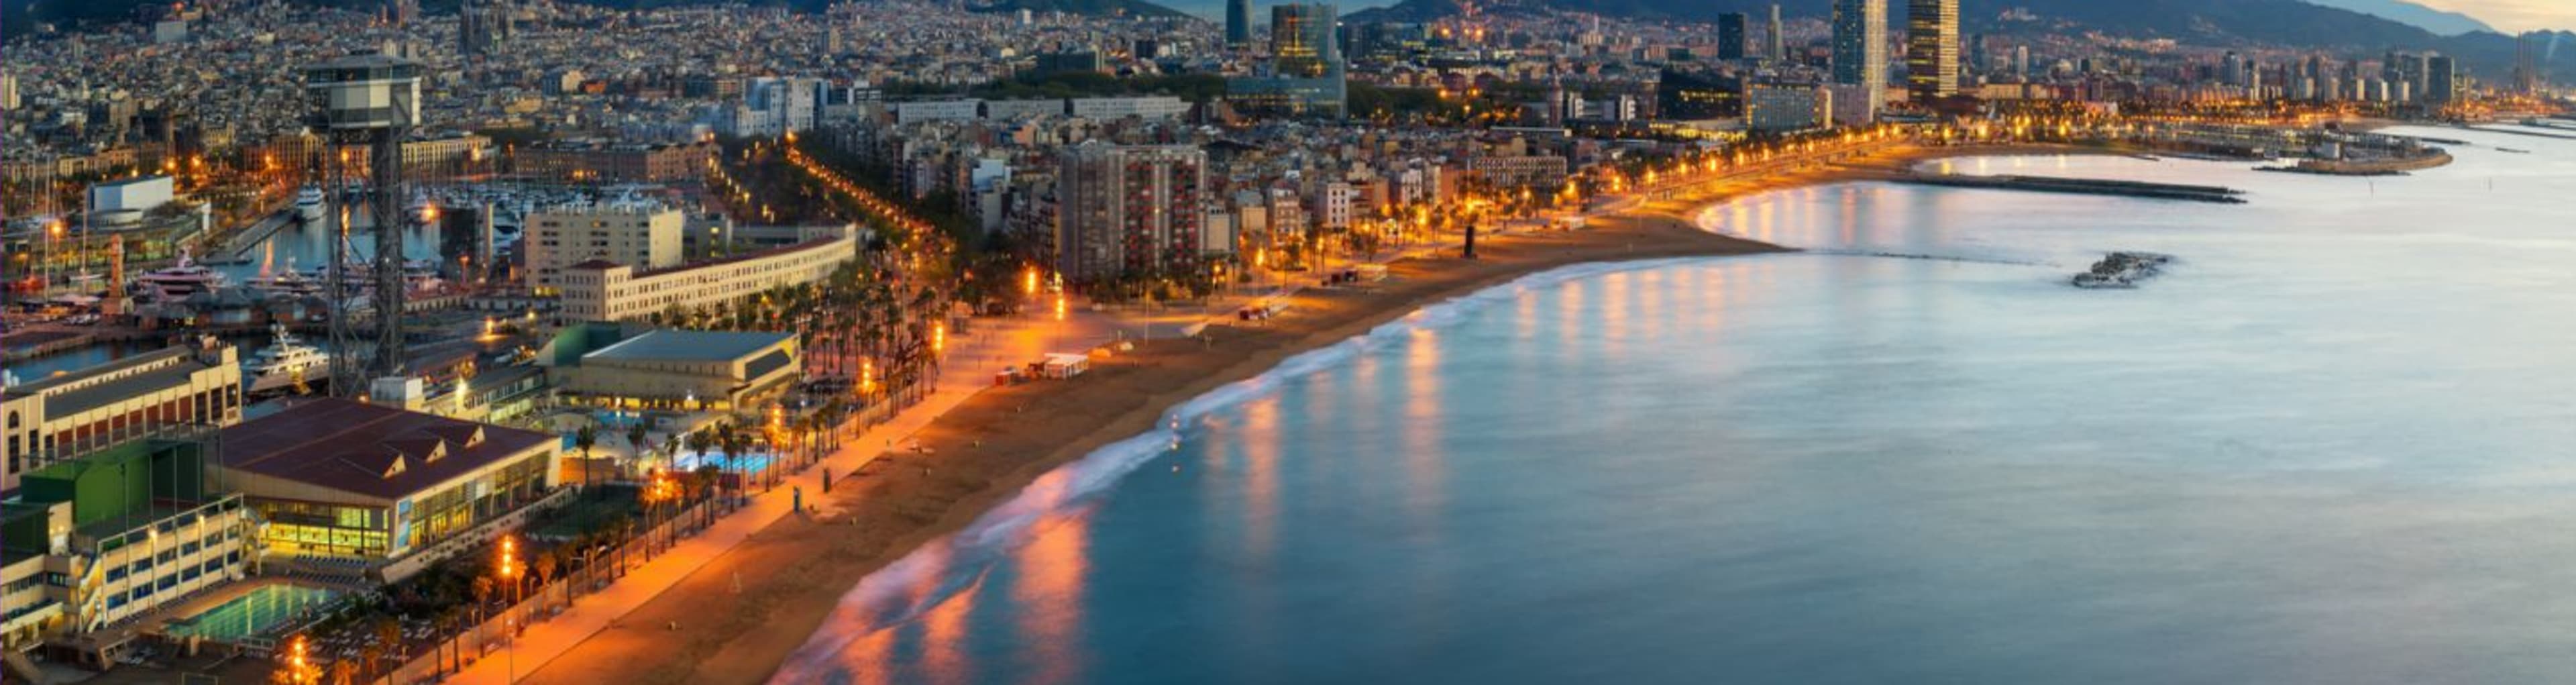 Wide view of Barcelona showing the curve of the bay and the lights of the city as golden evening falls